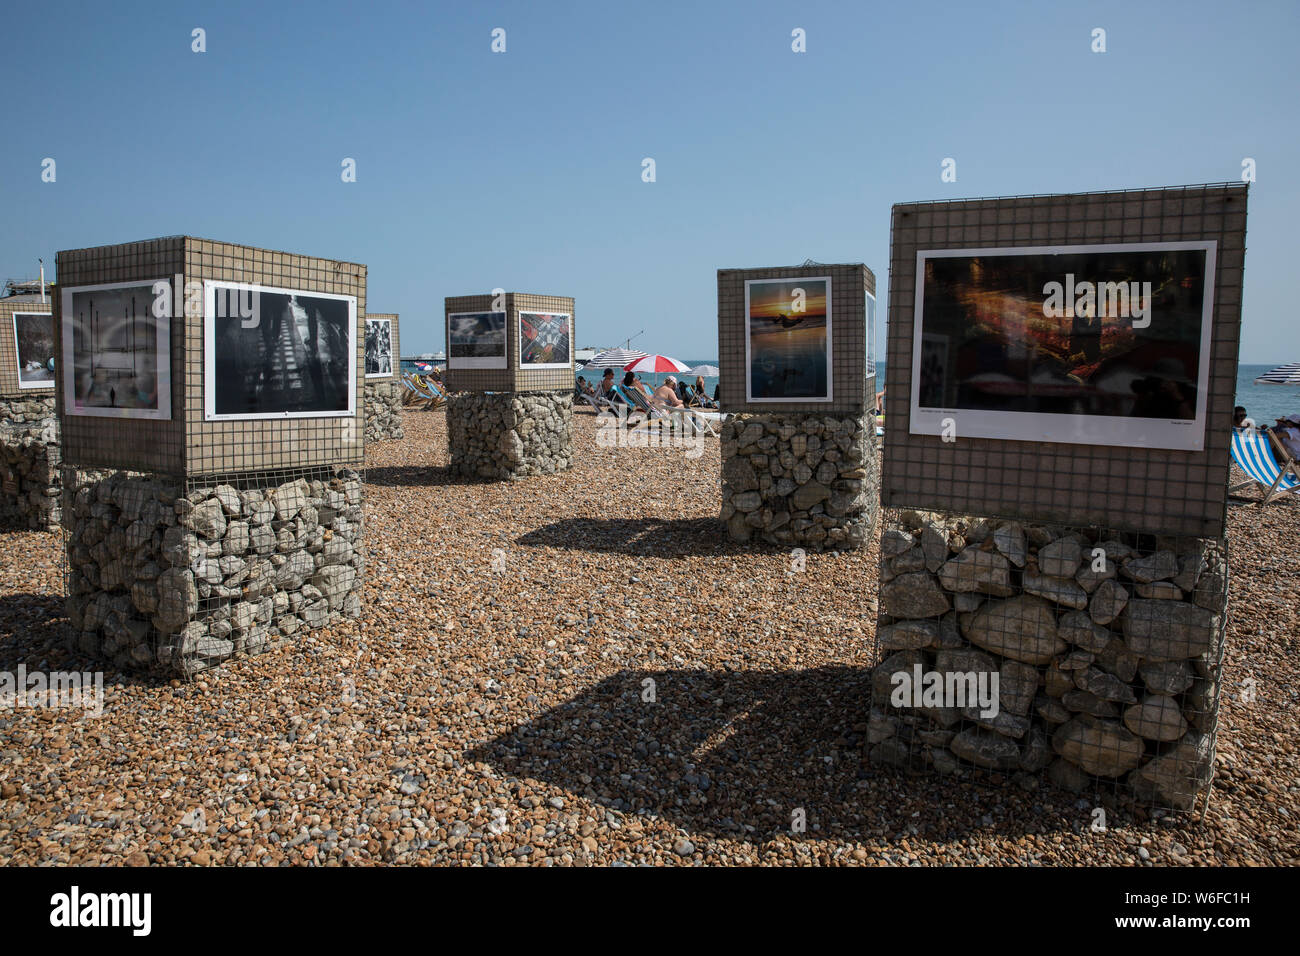 Outdoors photography exhibition presented on Brighton beach, Brighton Seafront, seaside town in the county of East Sussex, England, United Kingdom Stock Photo